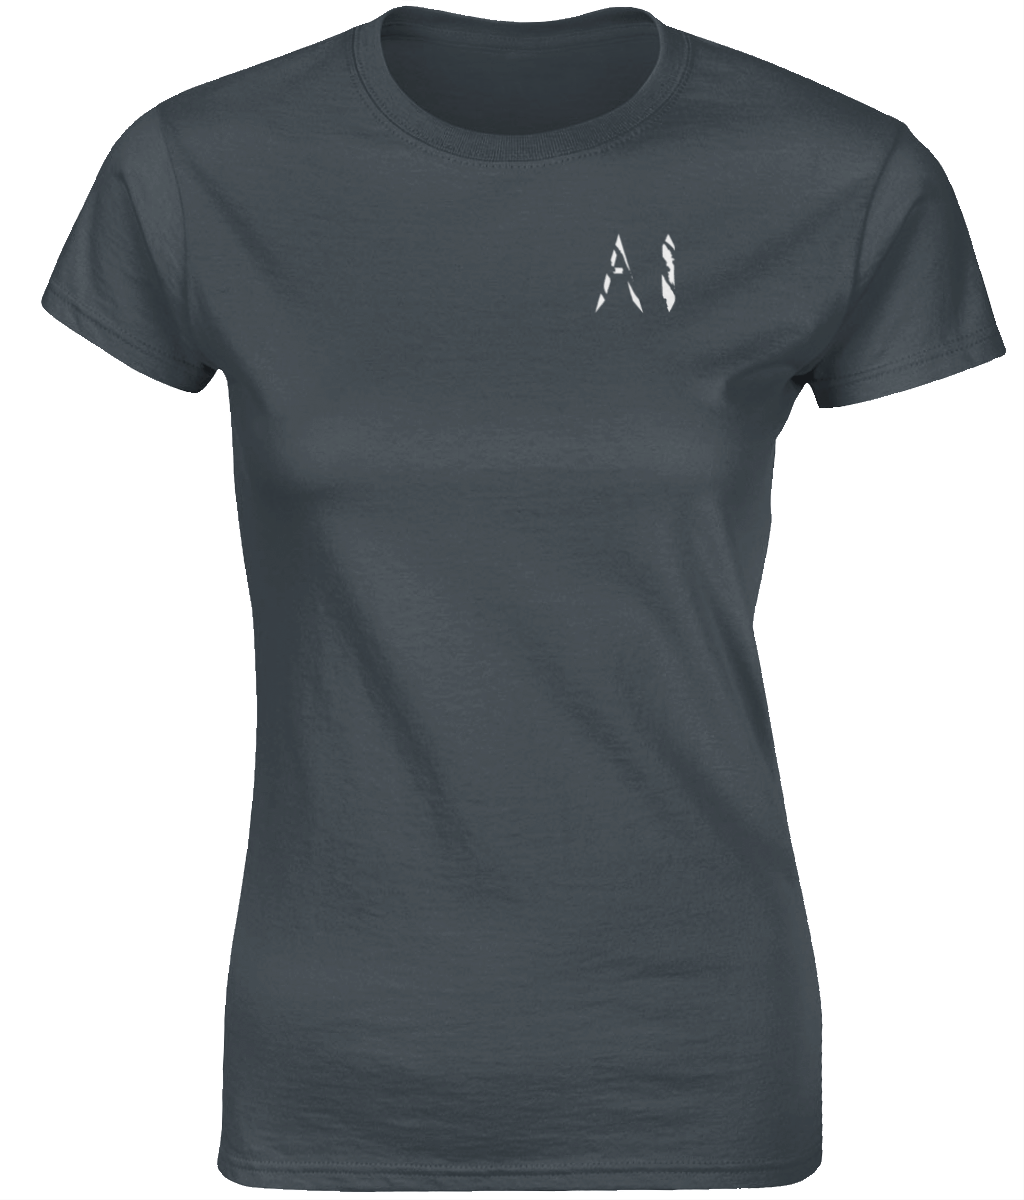 Womens grey Fitted Ringspun T-Shirt with White AI logo on left breast